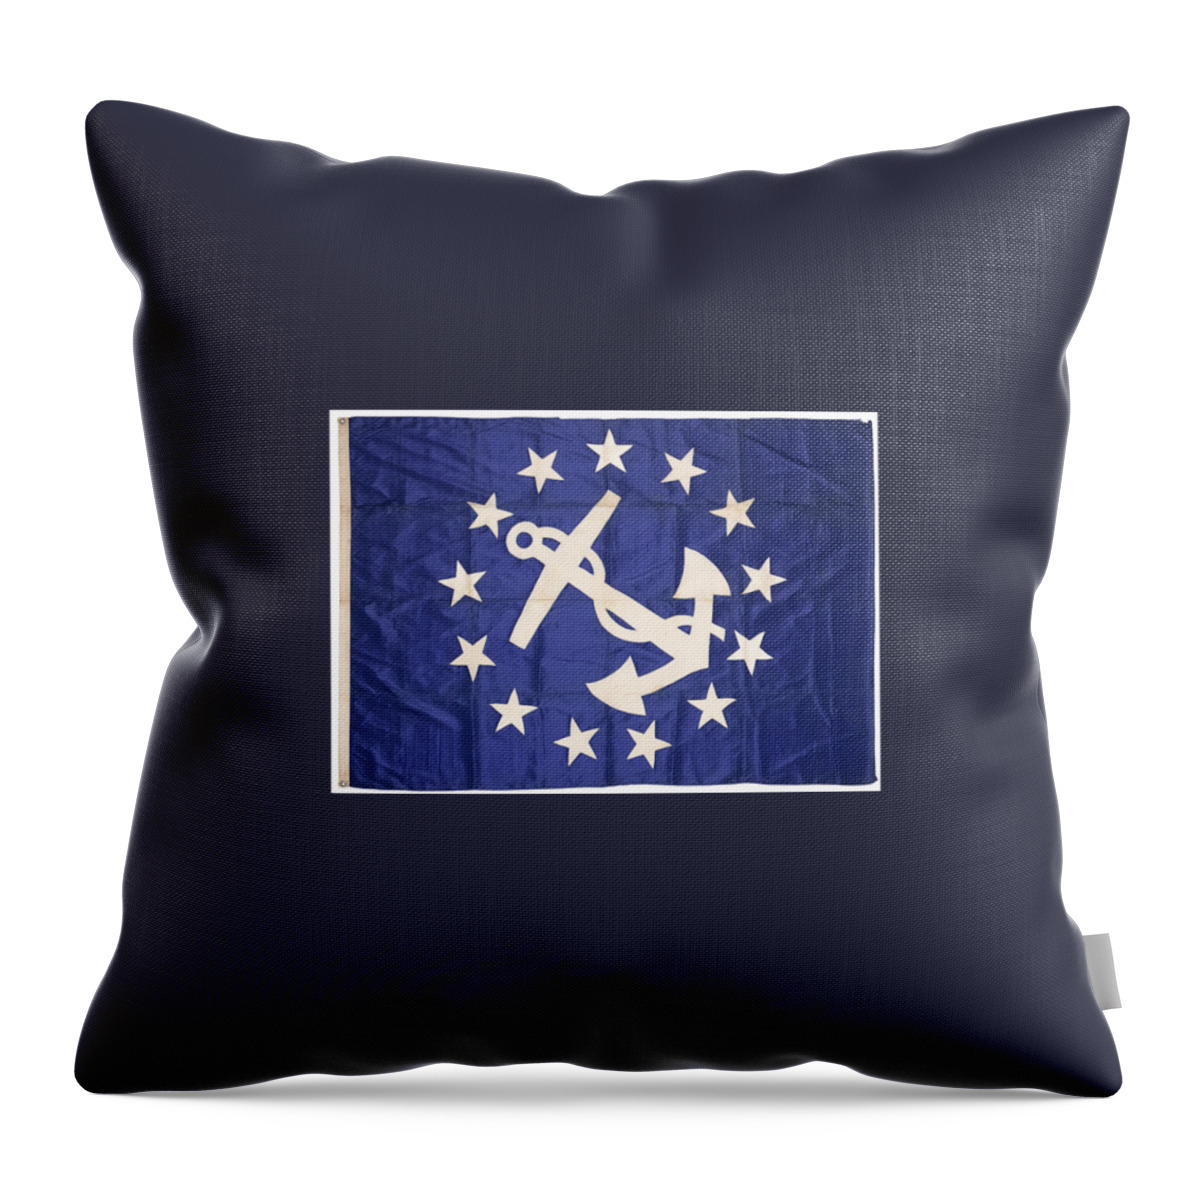 Flags From J.p. Morgan's Steam Yacht(s) Corsair 3 Throw Pillow featuring the painting Steam Yacht by MotionAge Designs